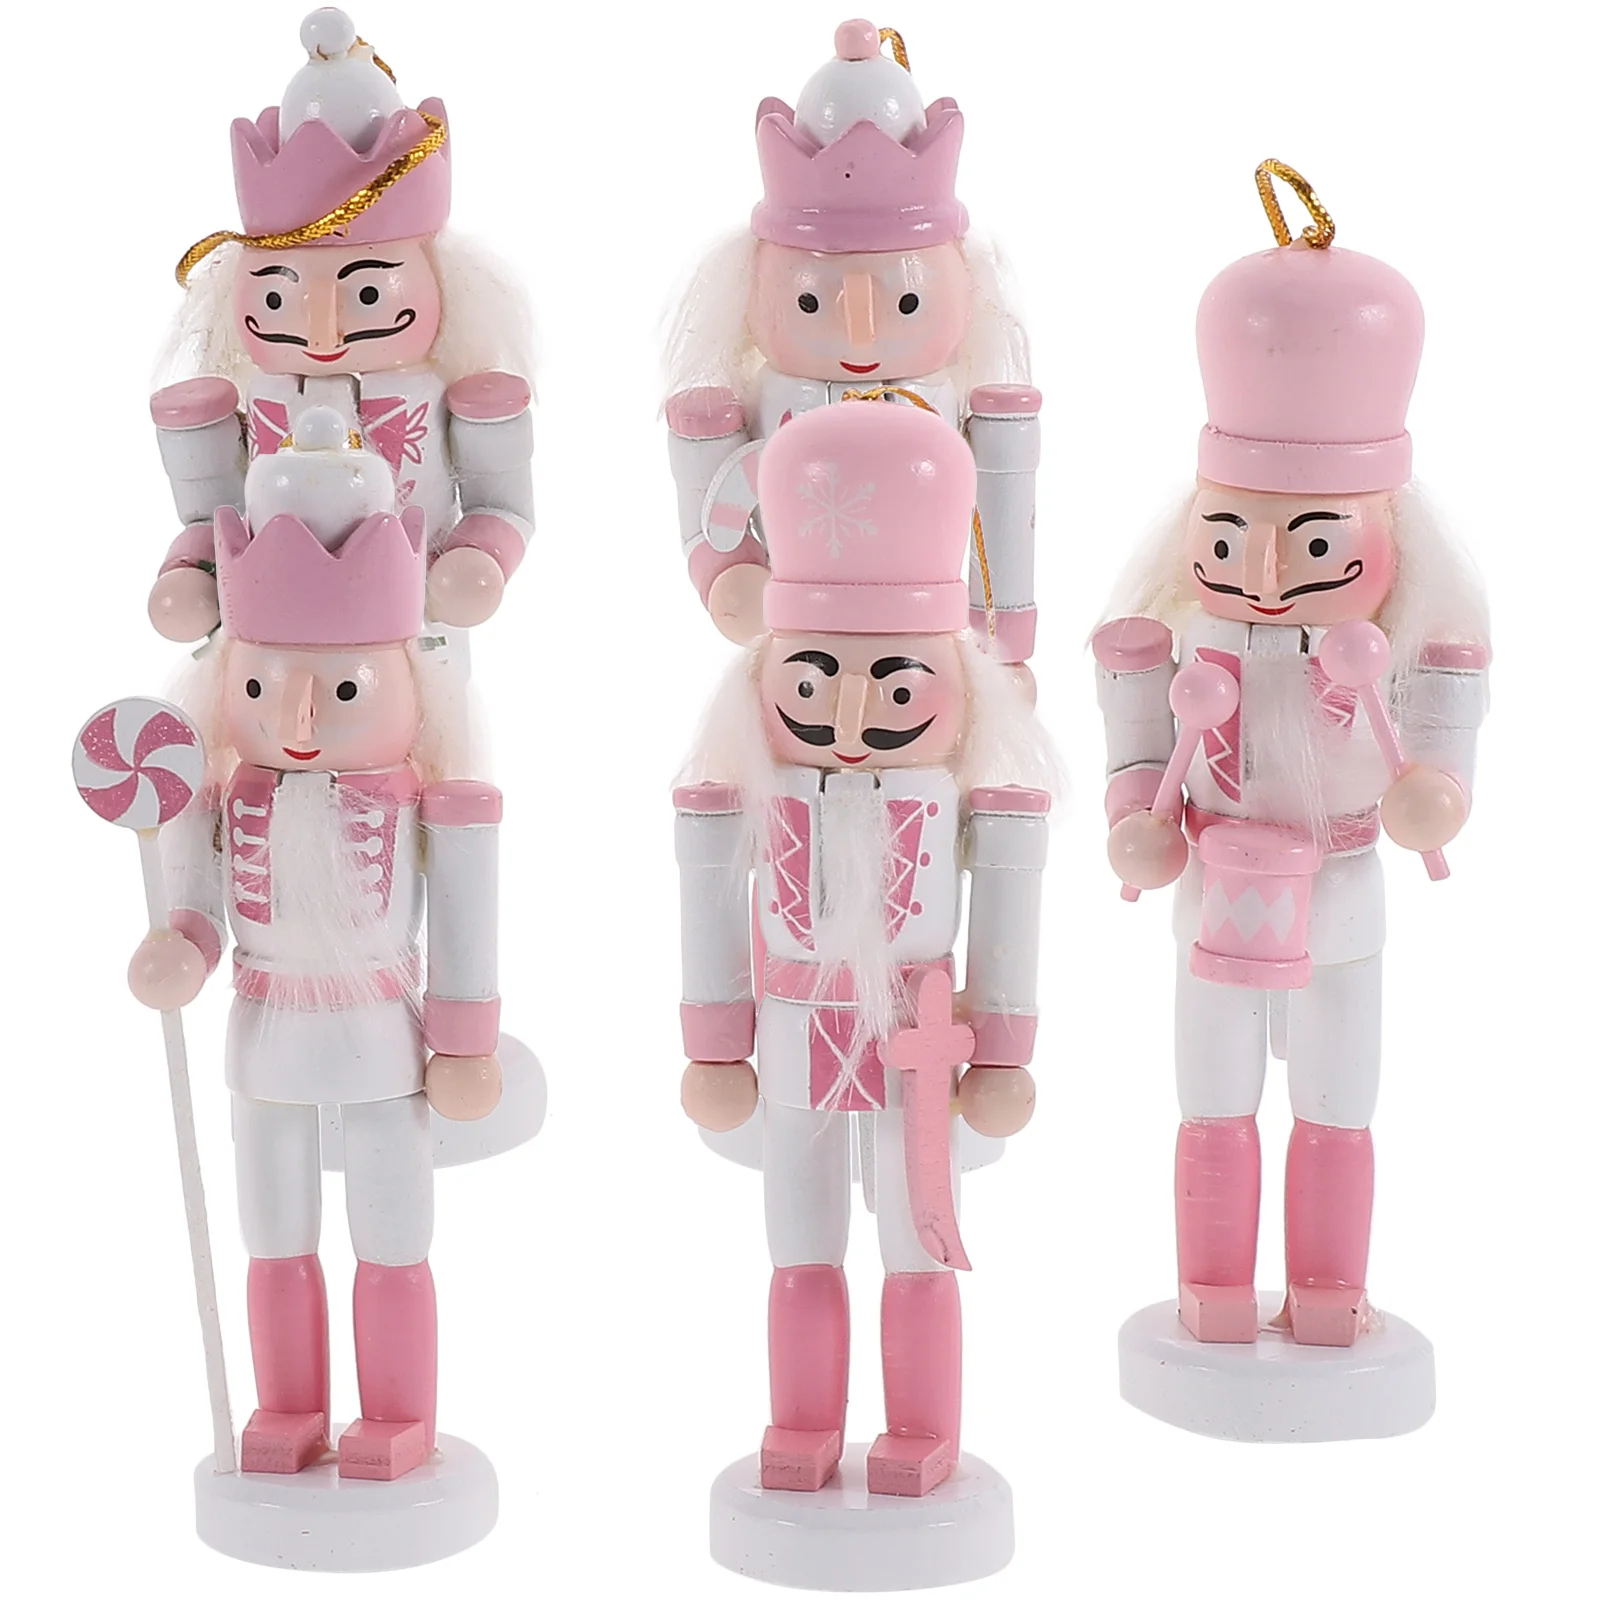 

Pink Christmas Decorations Kids Nutcracker Soldier Doll Wooden Pendants New Year Ornaments For Navidad Xmas Tree Hanging